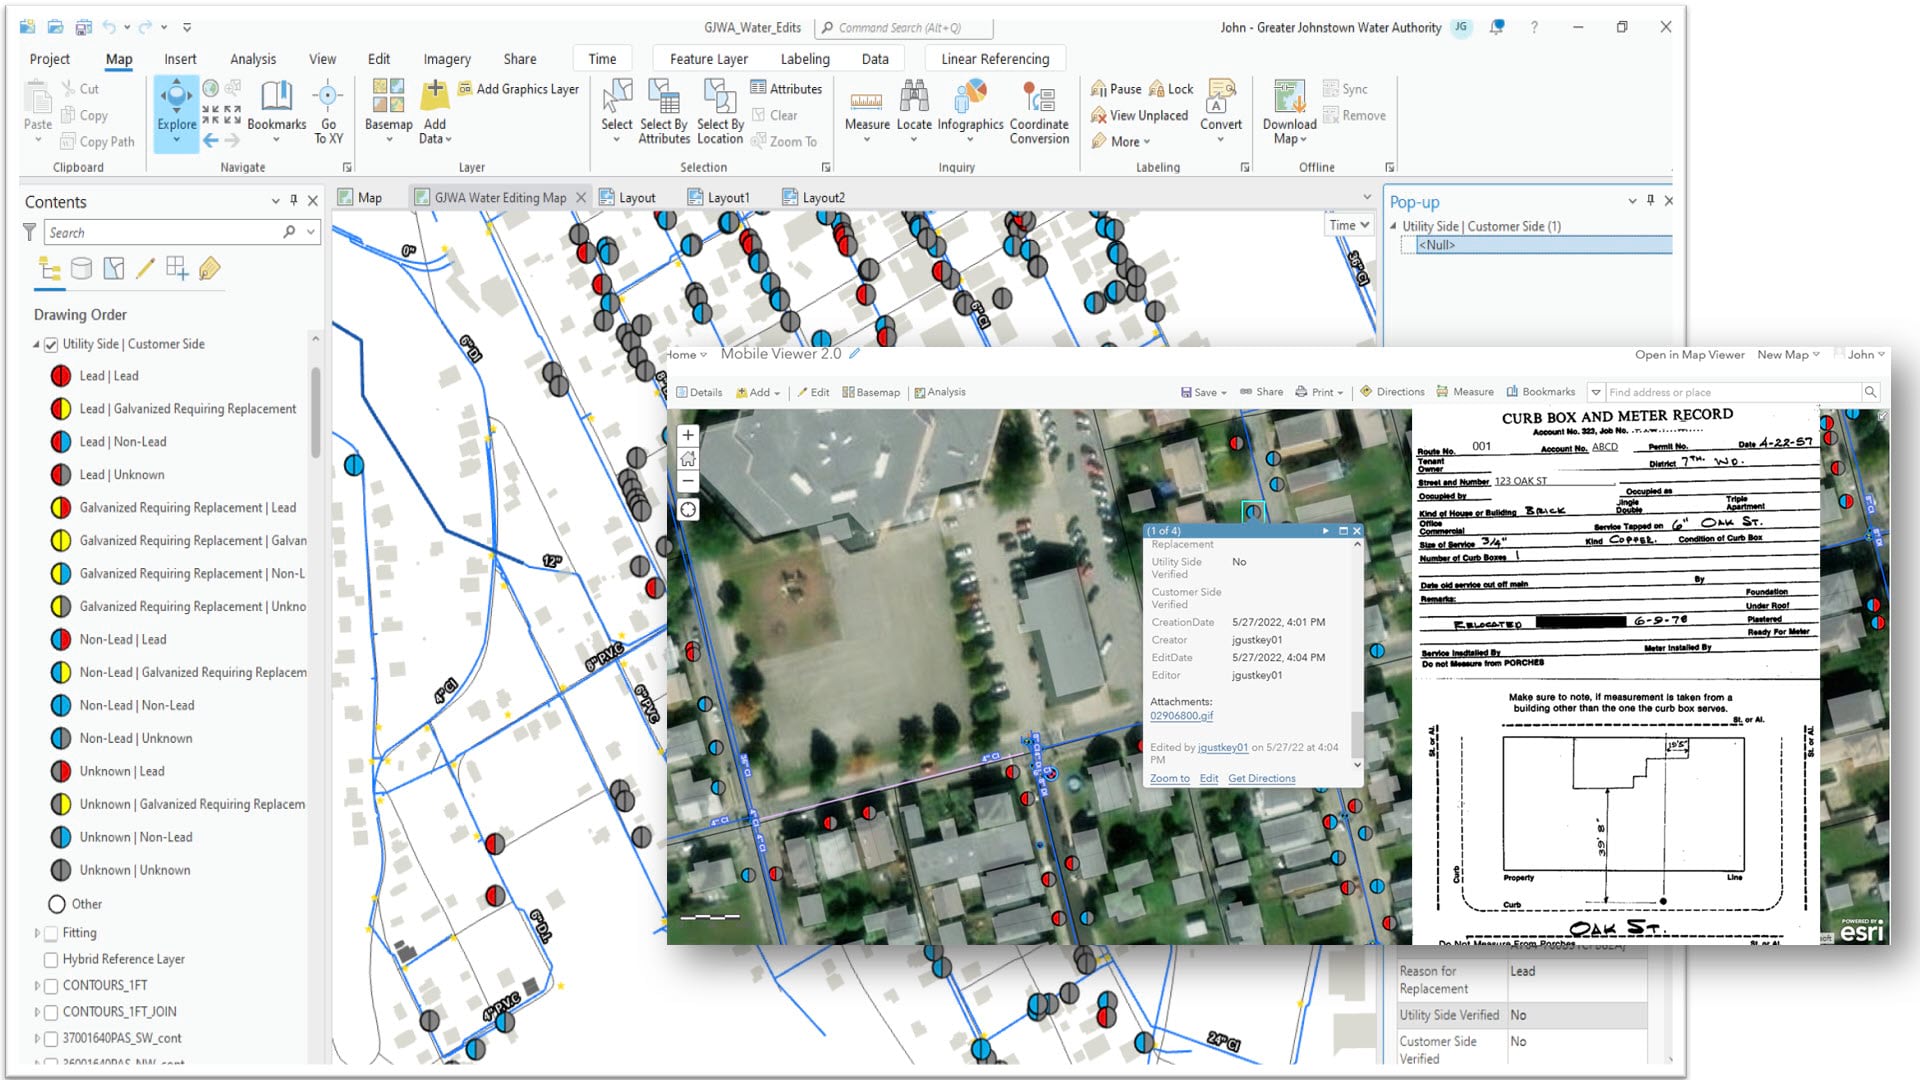 Service lines mapped and shown in ArcGIS Pro and GJWA’s mobile viewer, including the attached tap card records. Click on the image to learn more about the work GJWA has done to meet LCRR requirements.